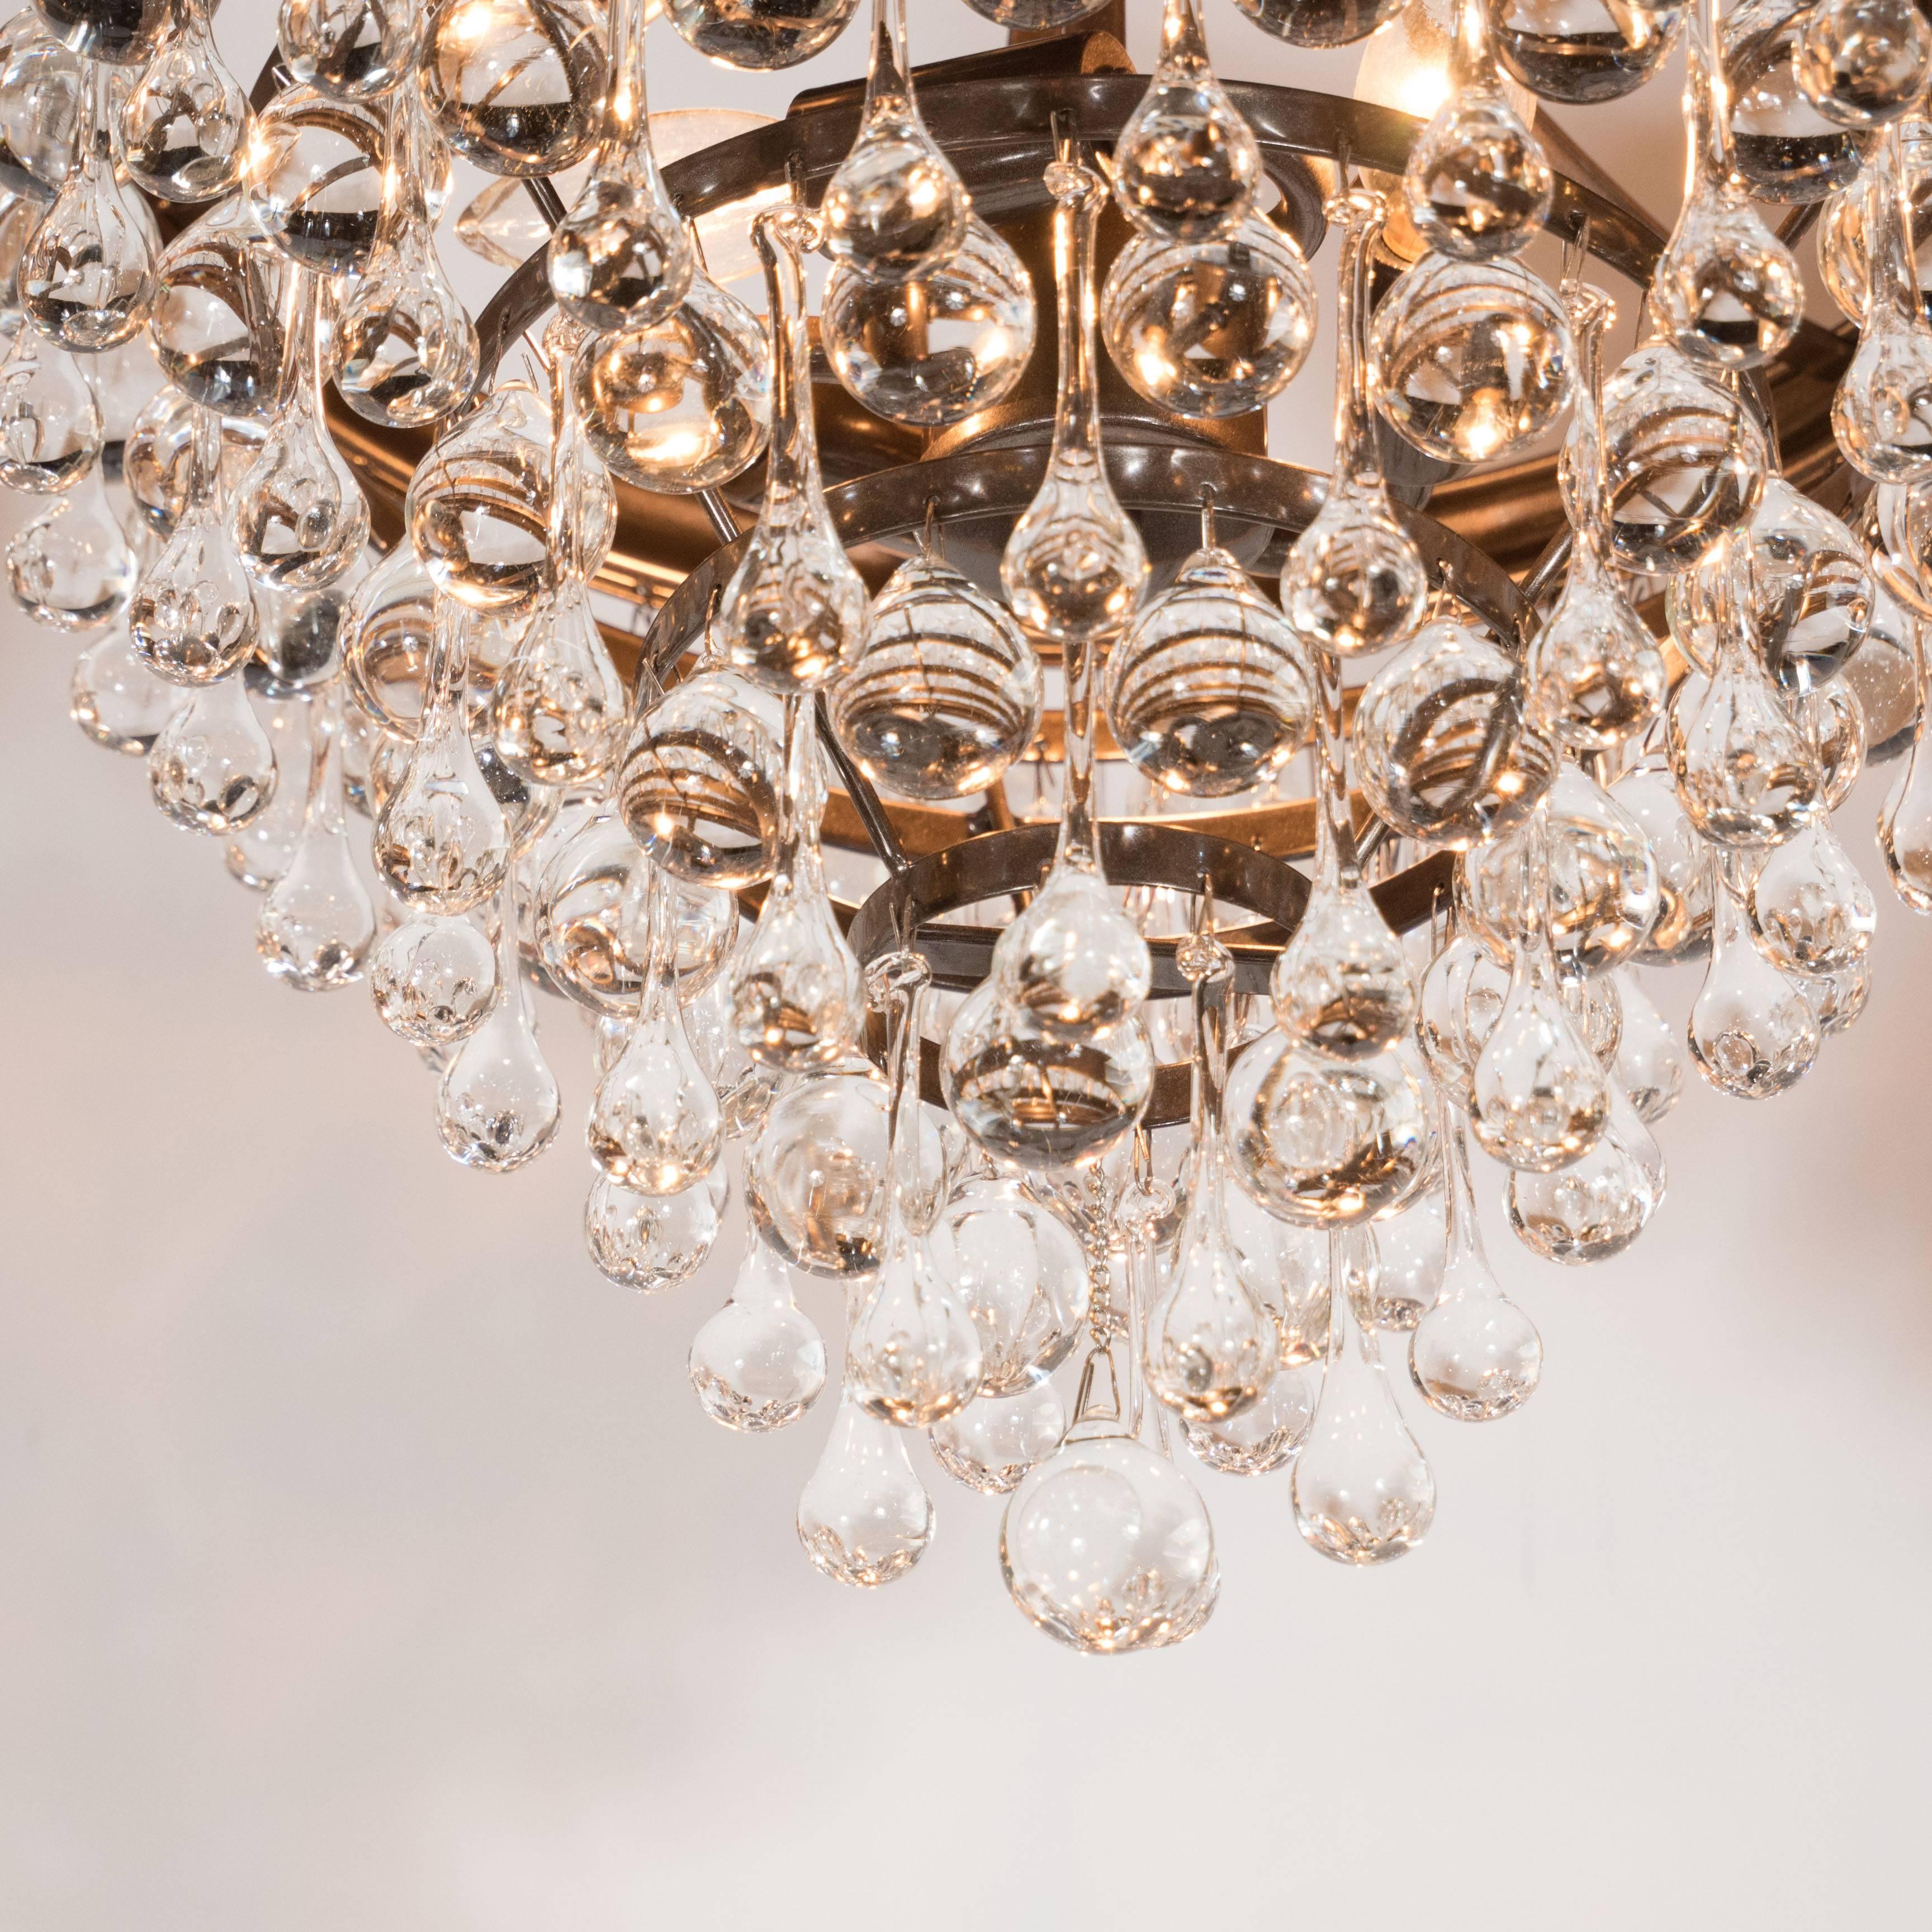 American Hollywood Regency Crystal Teardrop and Ball Chandelier with Bronze Fittings